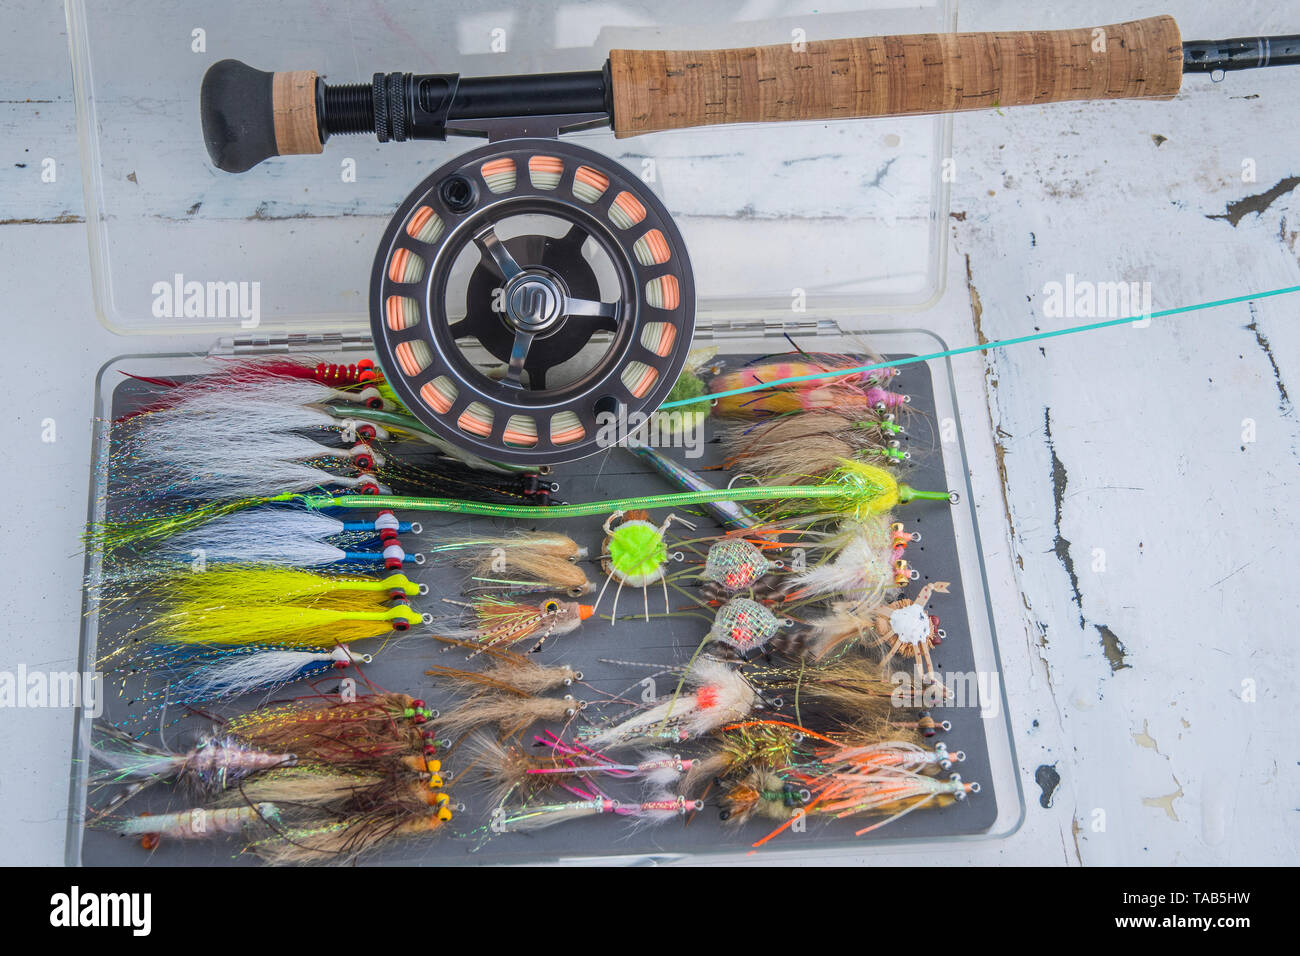 Saltwater fly fishing flies and fly rod and reel Stock Photo - Alamy